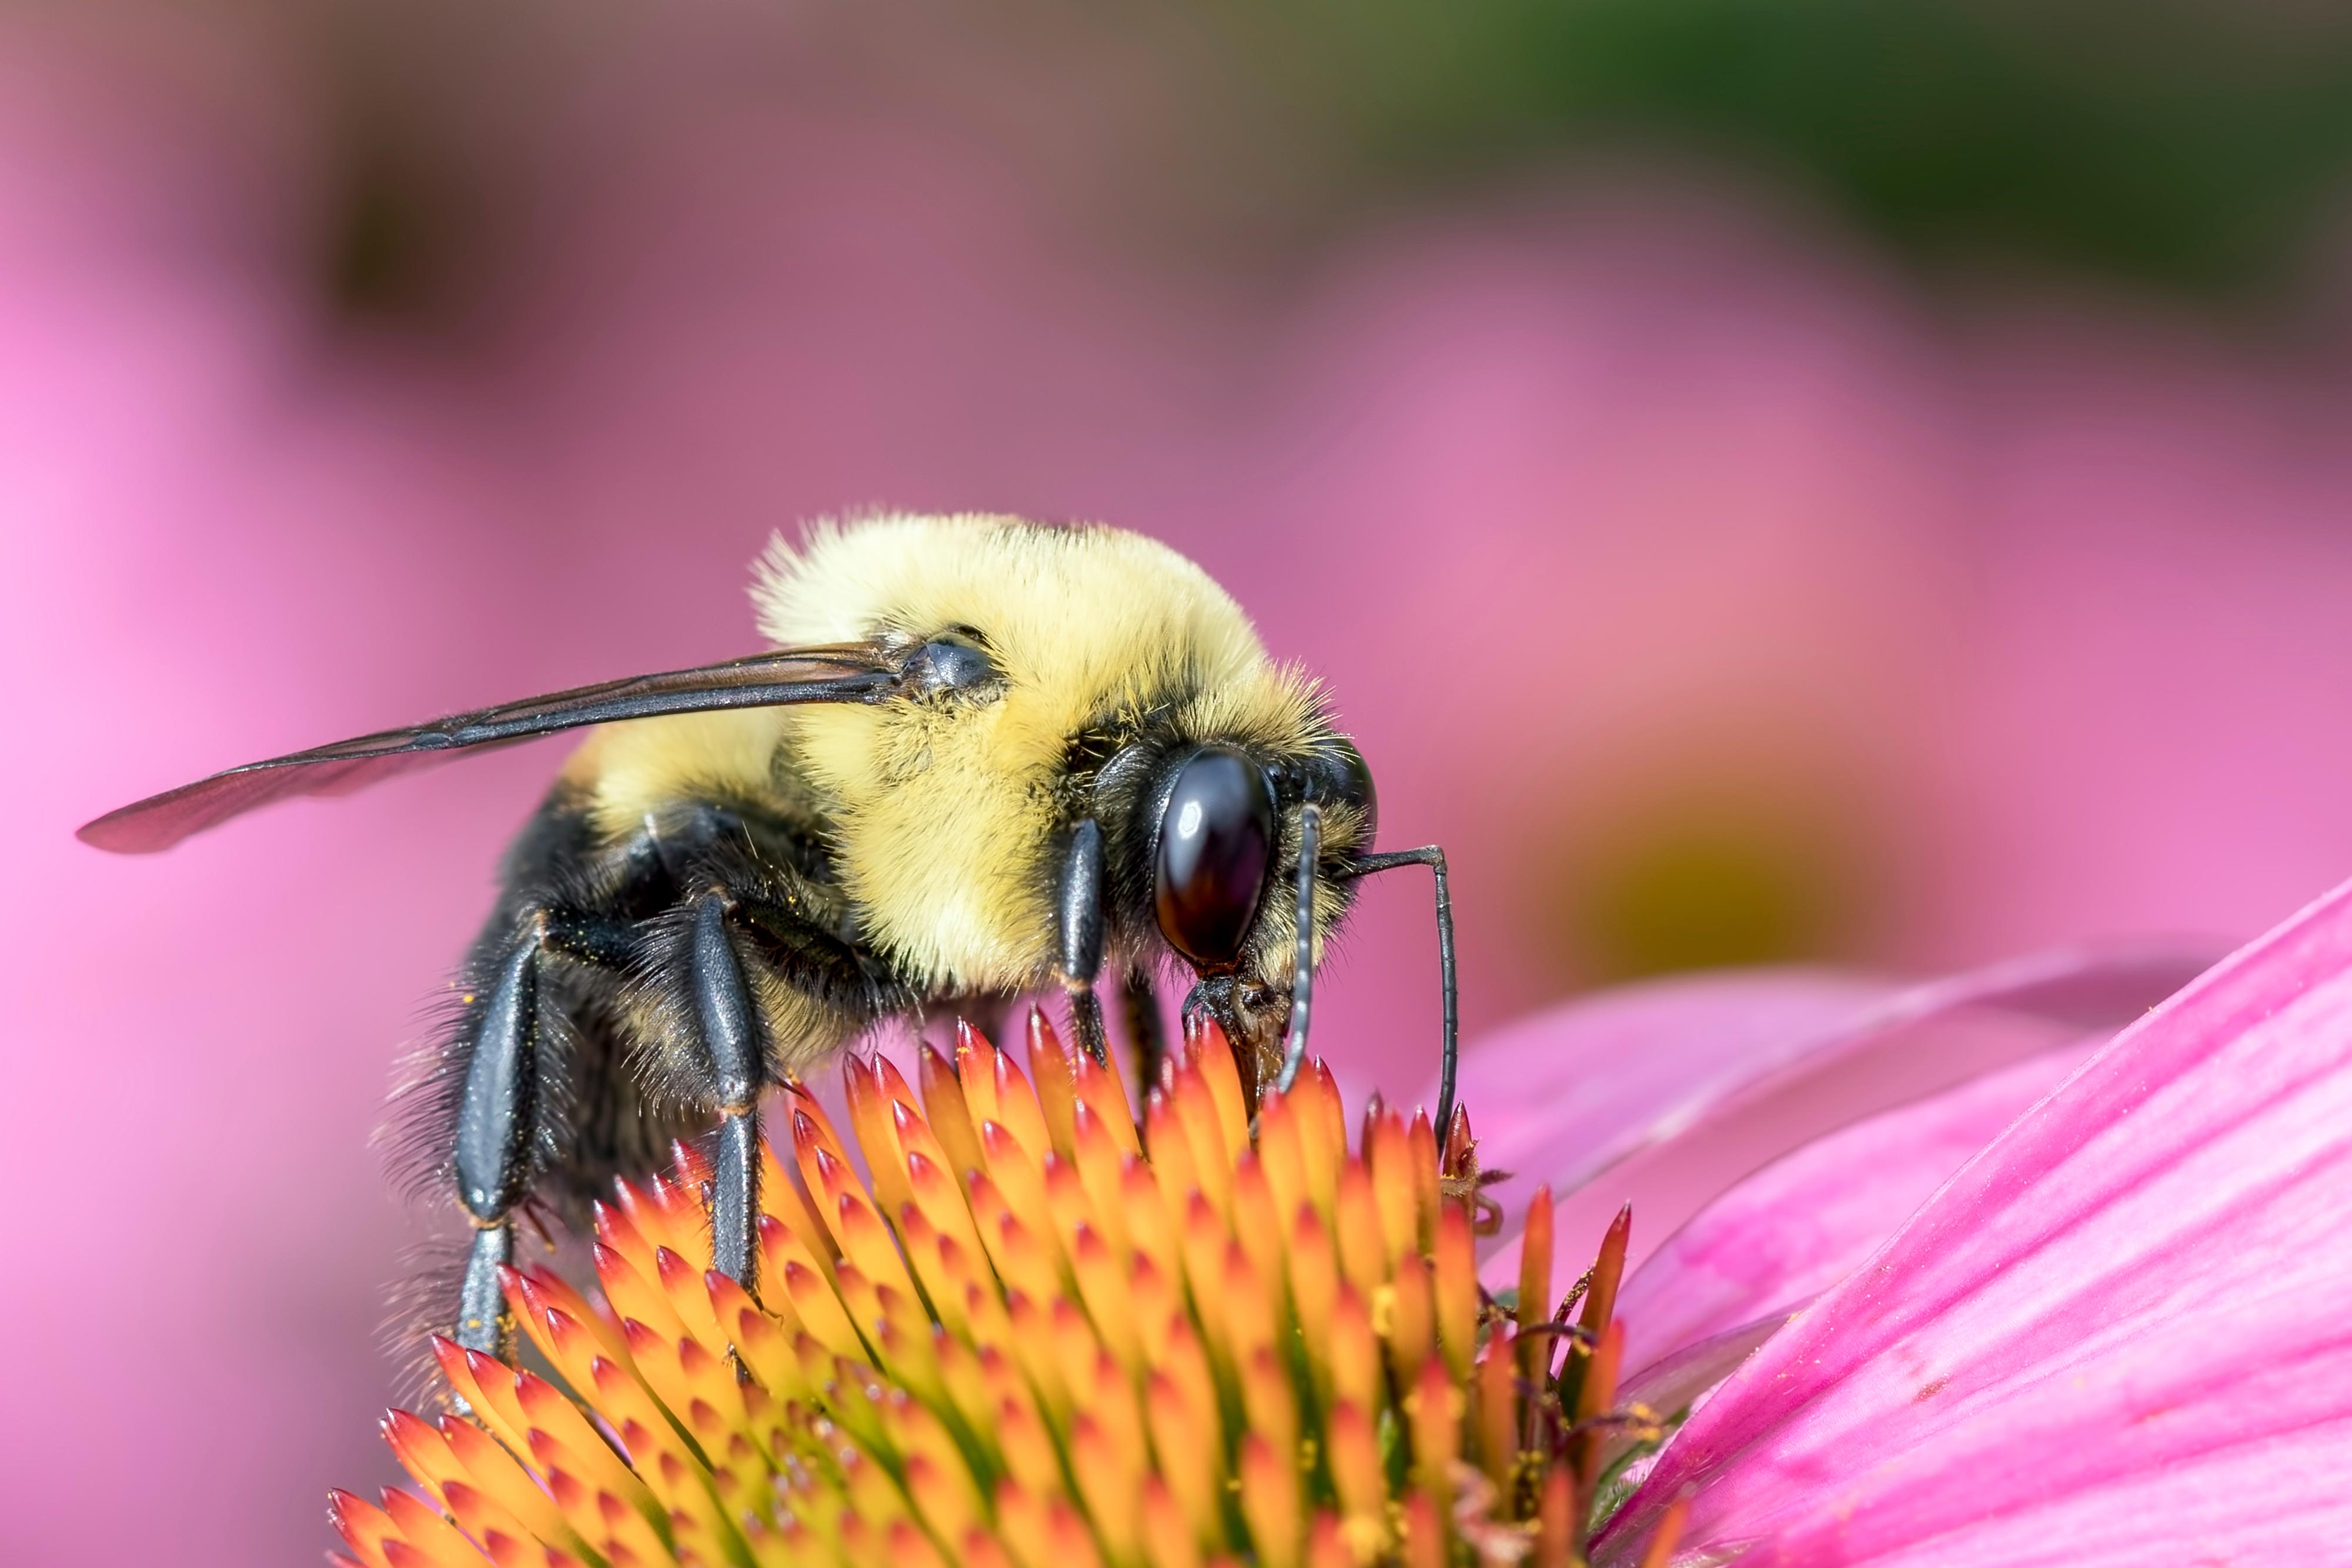 A bumble bee on a flower.